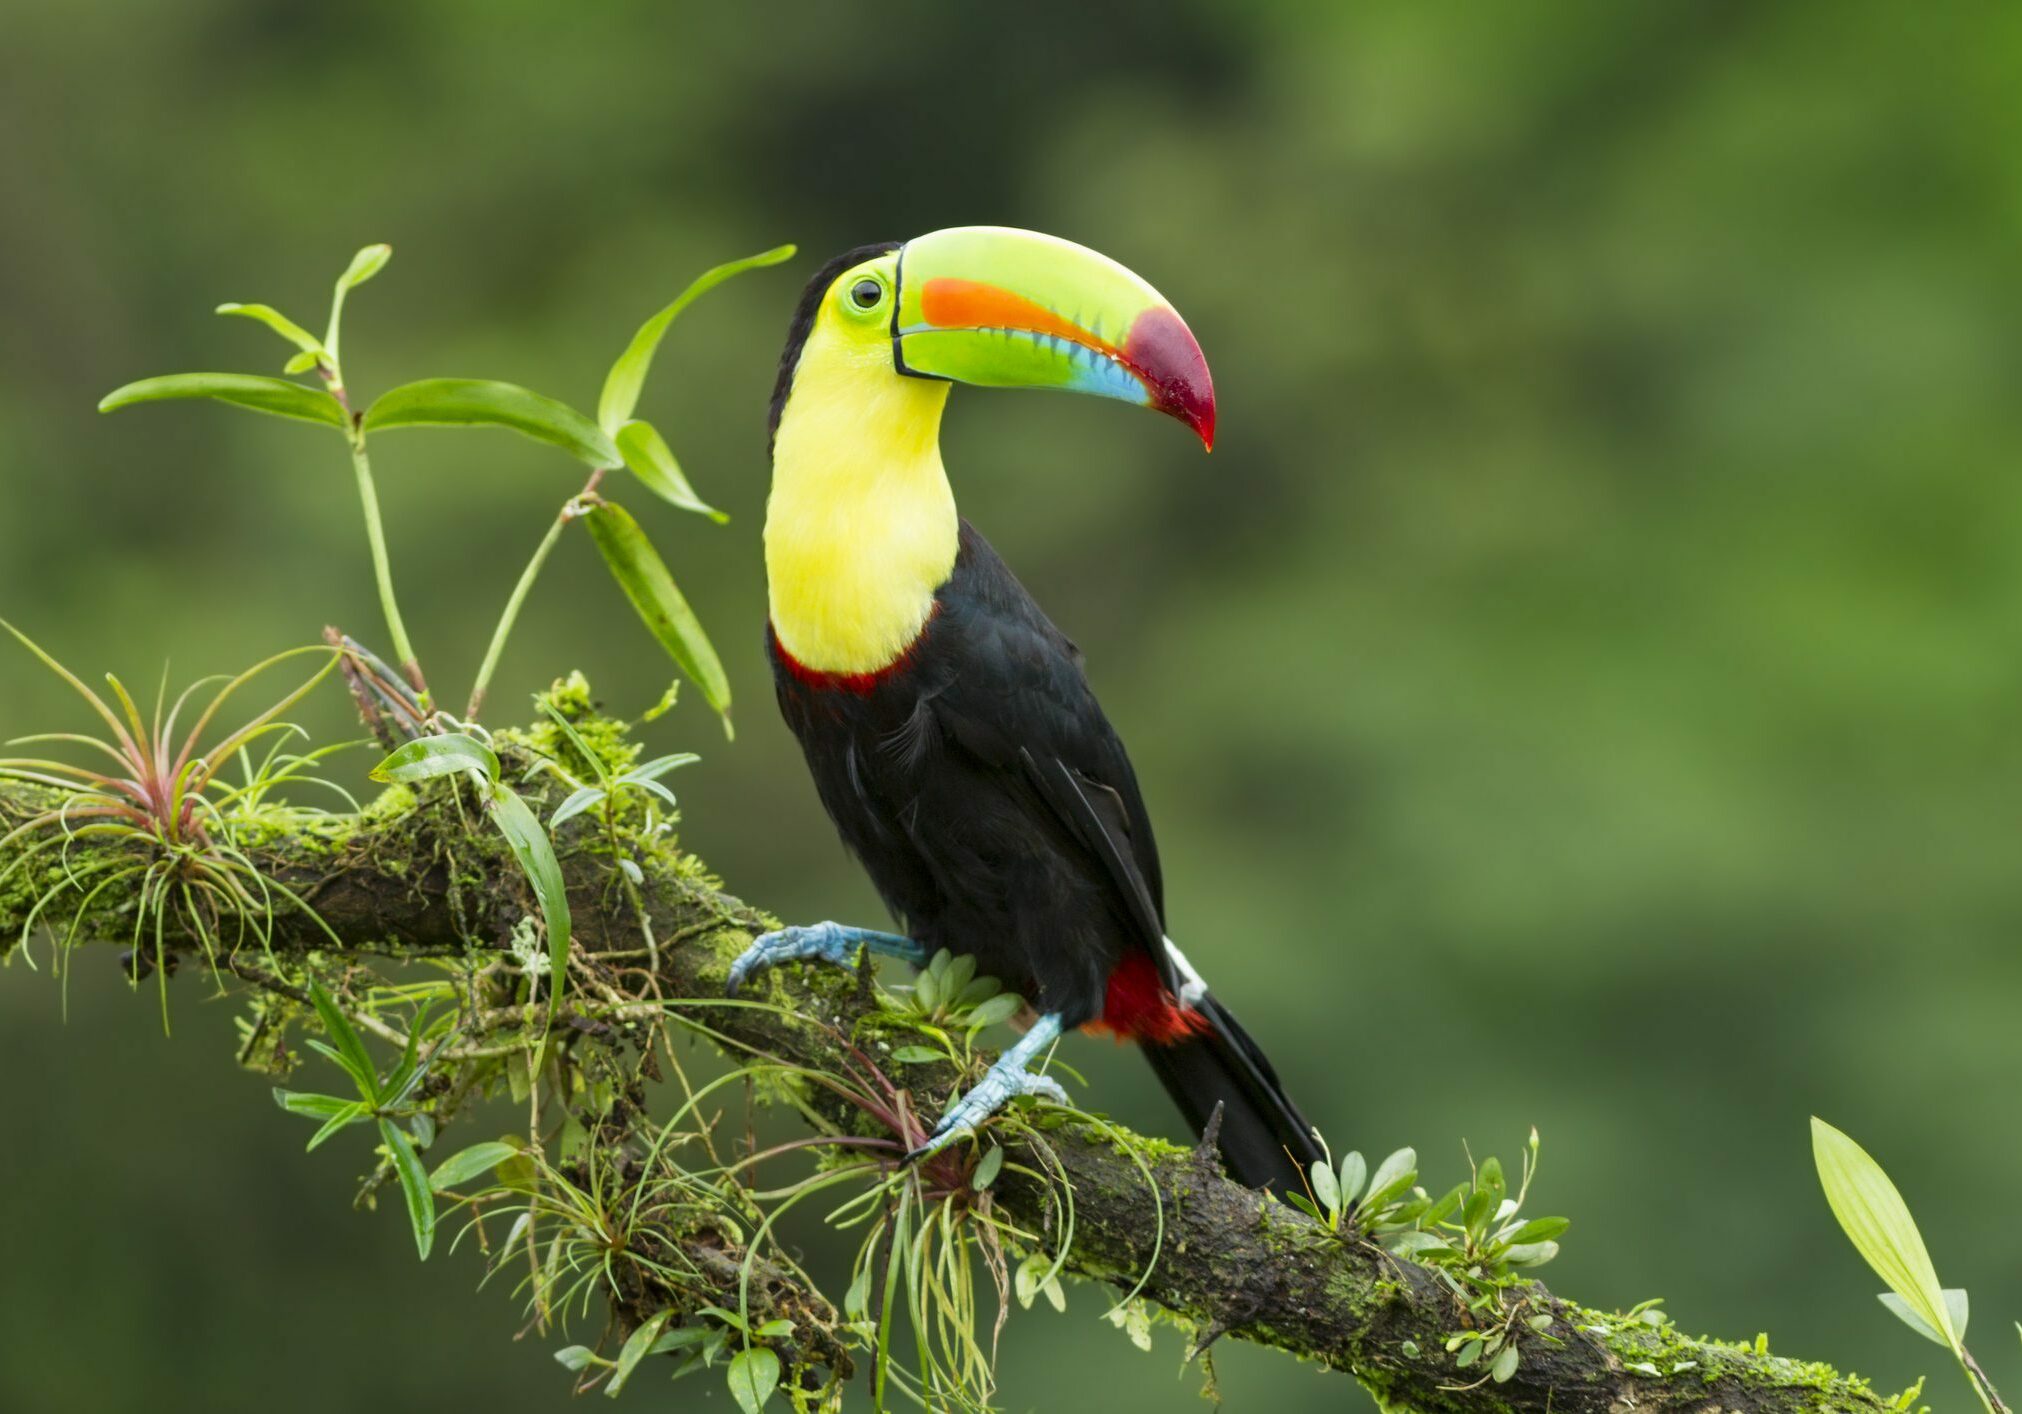 Keel-billed Toucan (Ramphastos sulfuratus) rests on a mossy branch at rainforest in Costa Rica